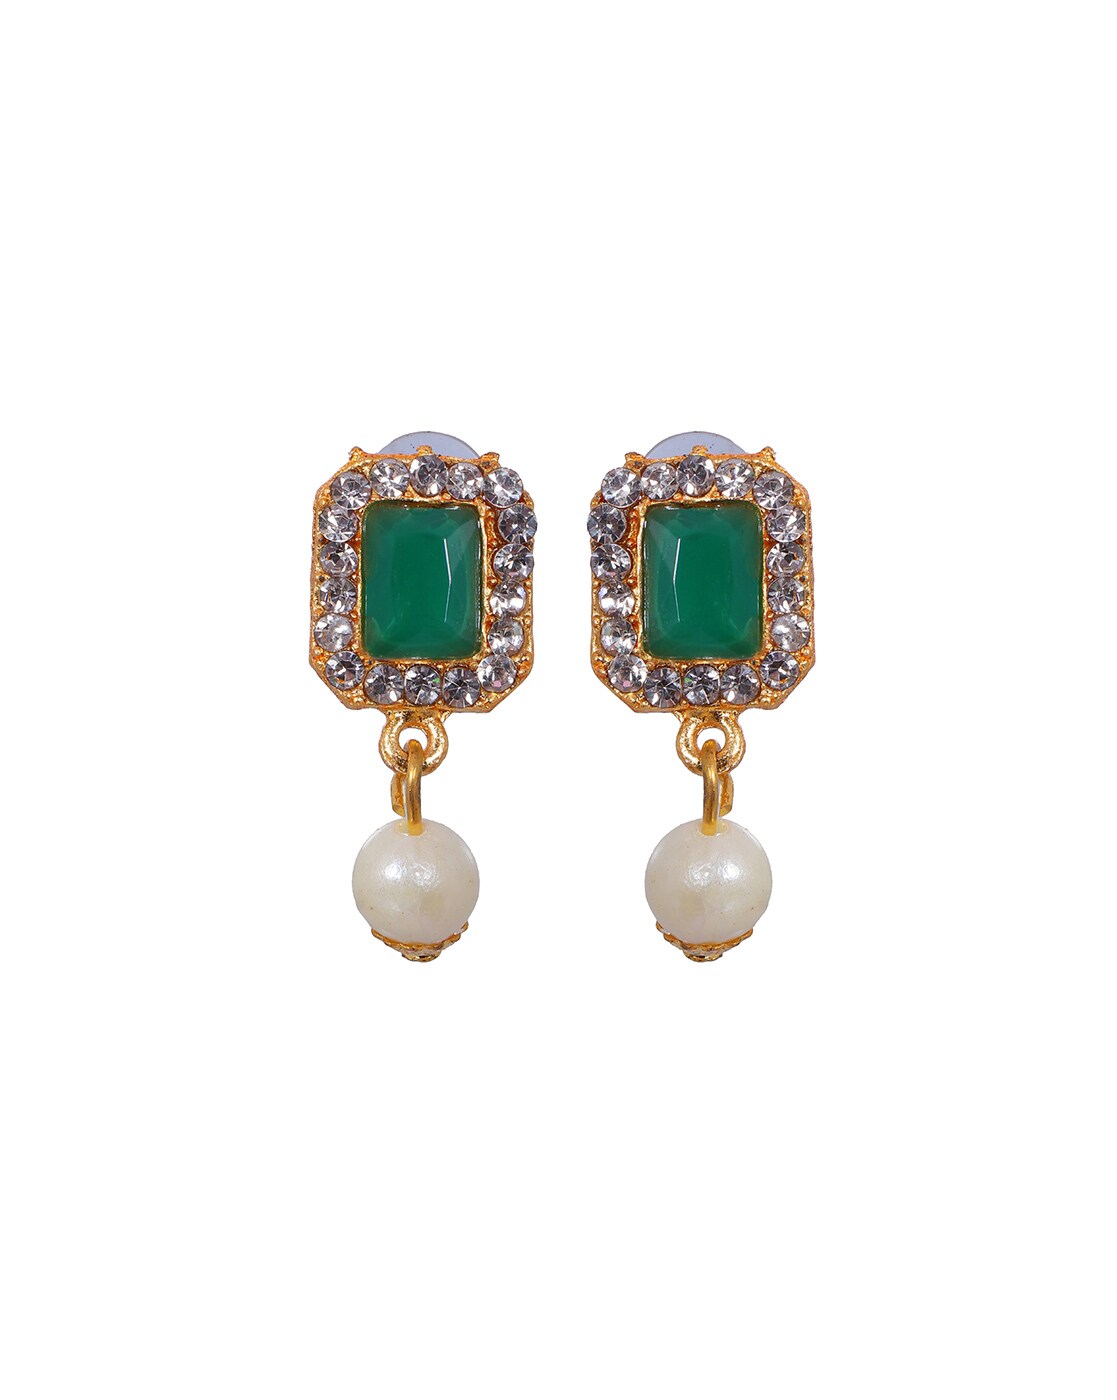 Women's Attractive White Pearls With Green Stone Choker  - Zaffre Collections